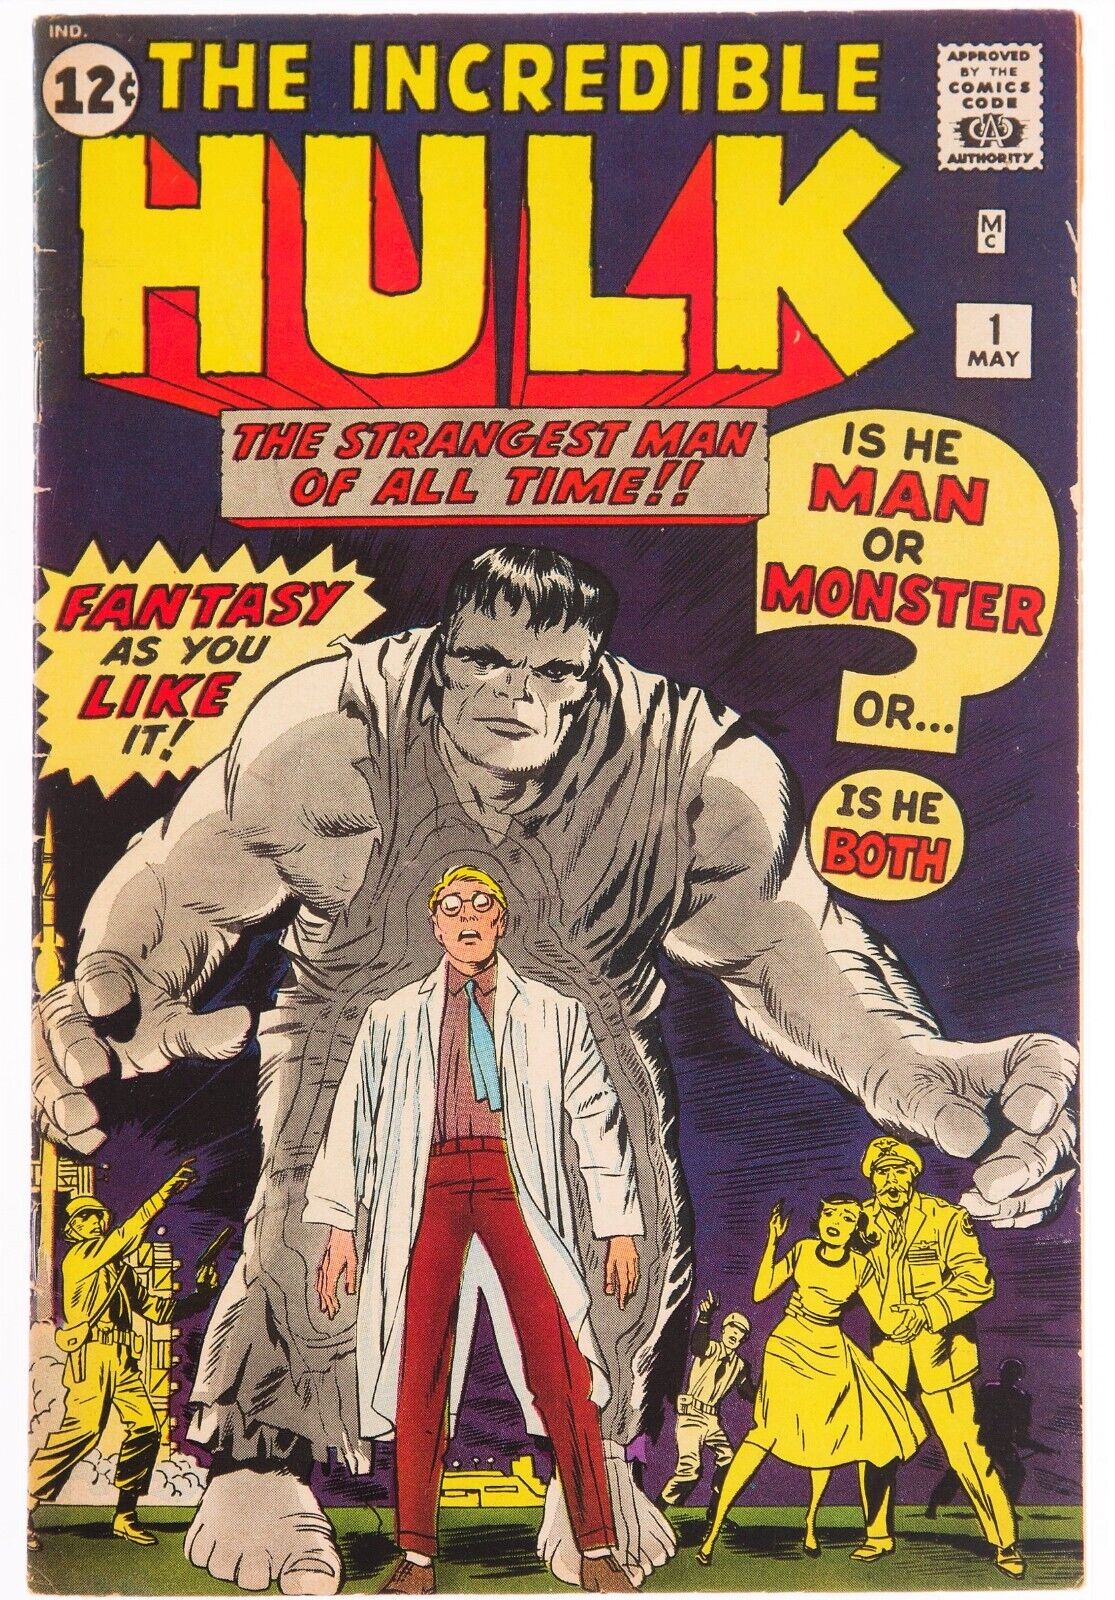 INCREDIBLE HULK Collection On Disc Marvel CLASSICS Now Own Every Issue